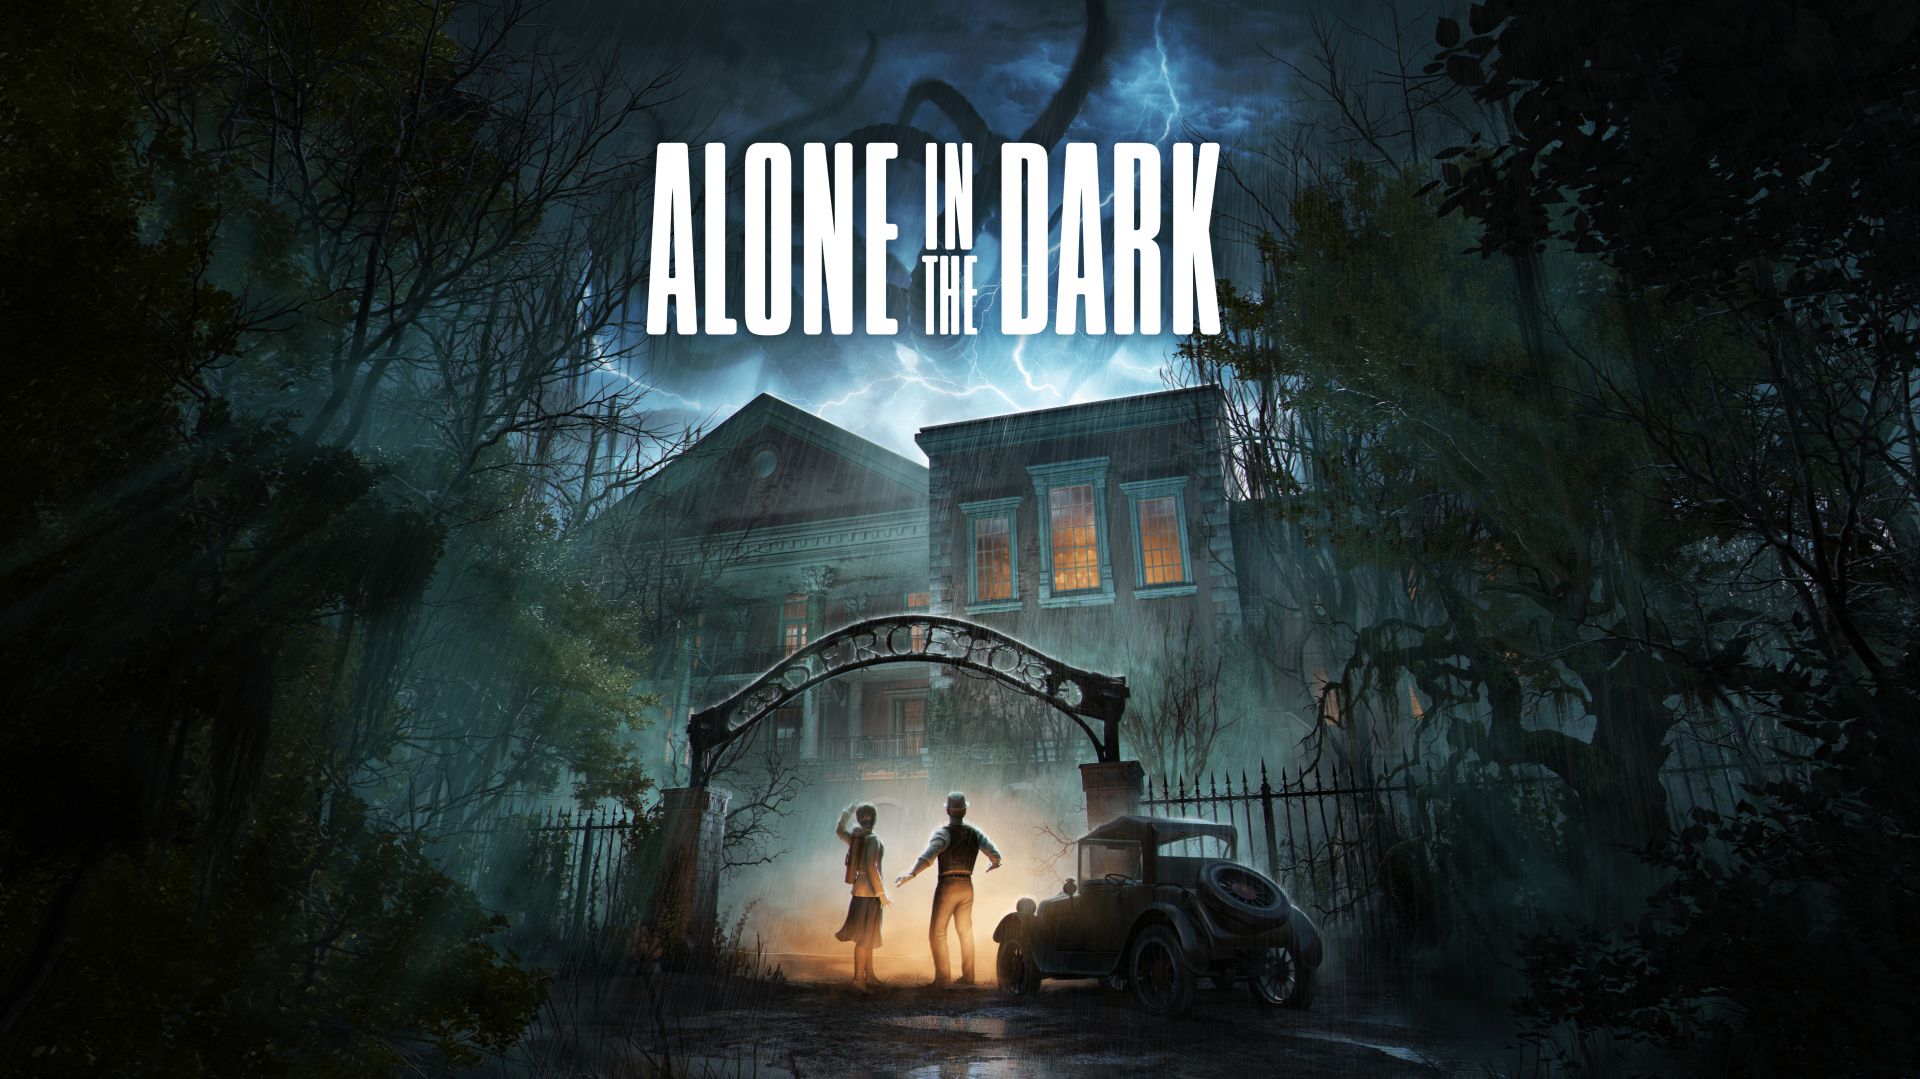 Monsters and Mysteries await as ‘Alone in the Dark’ OUT NOW